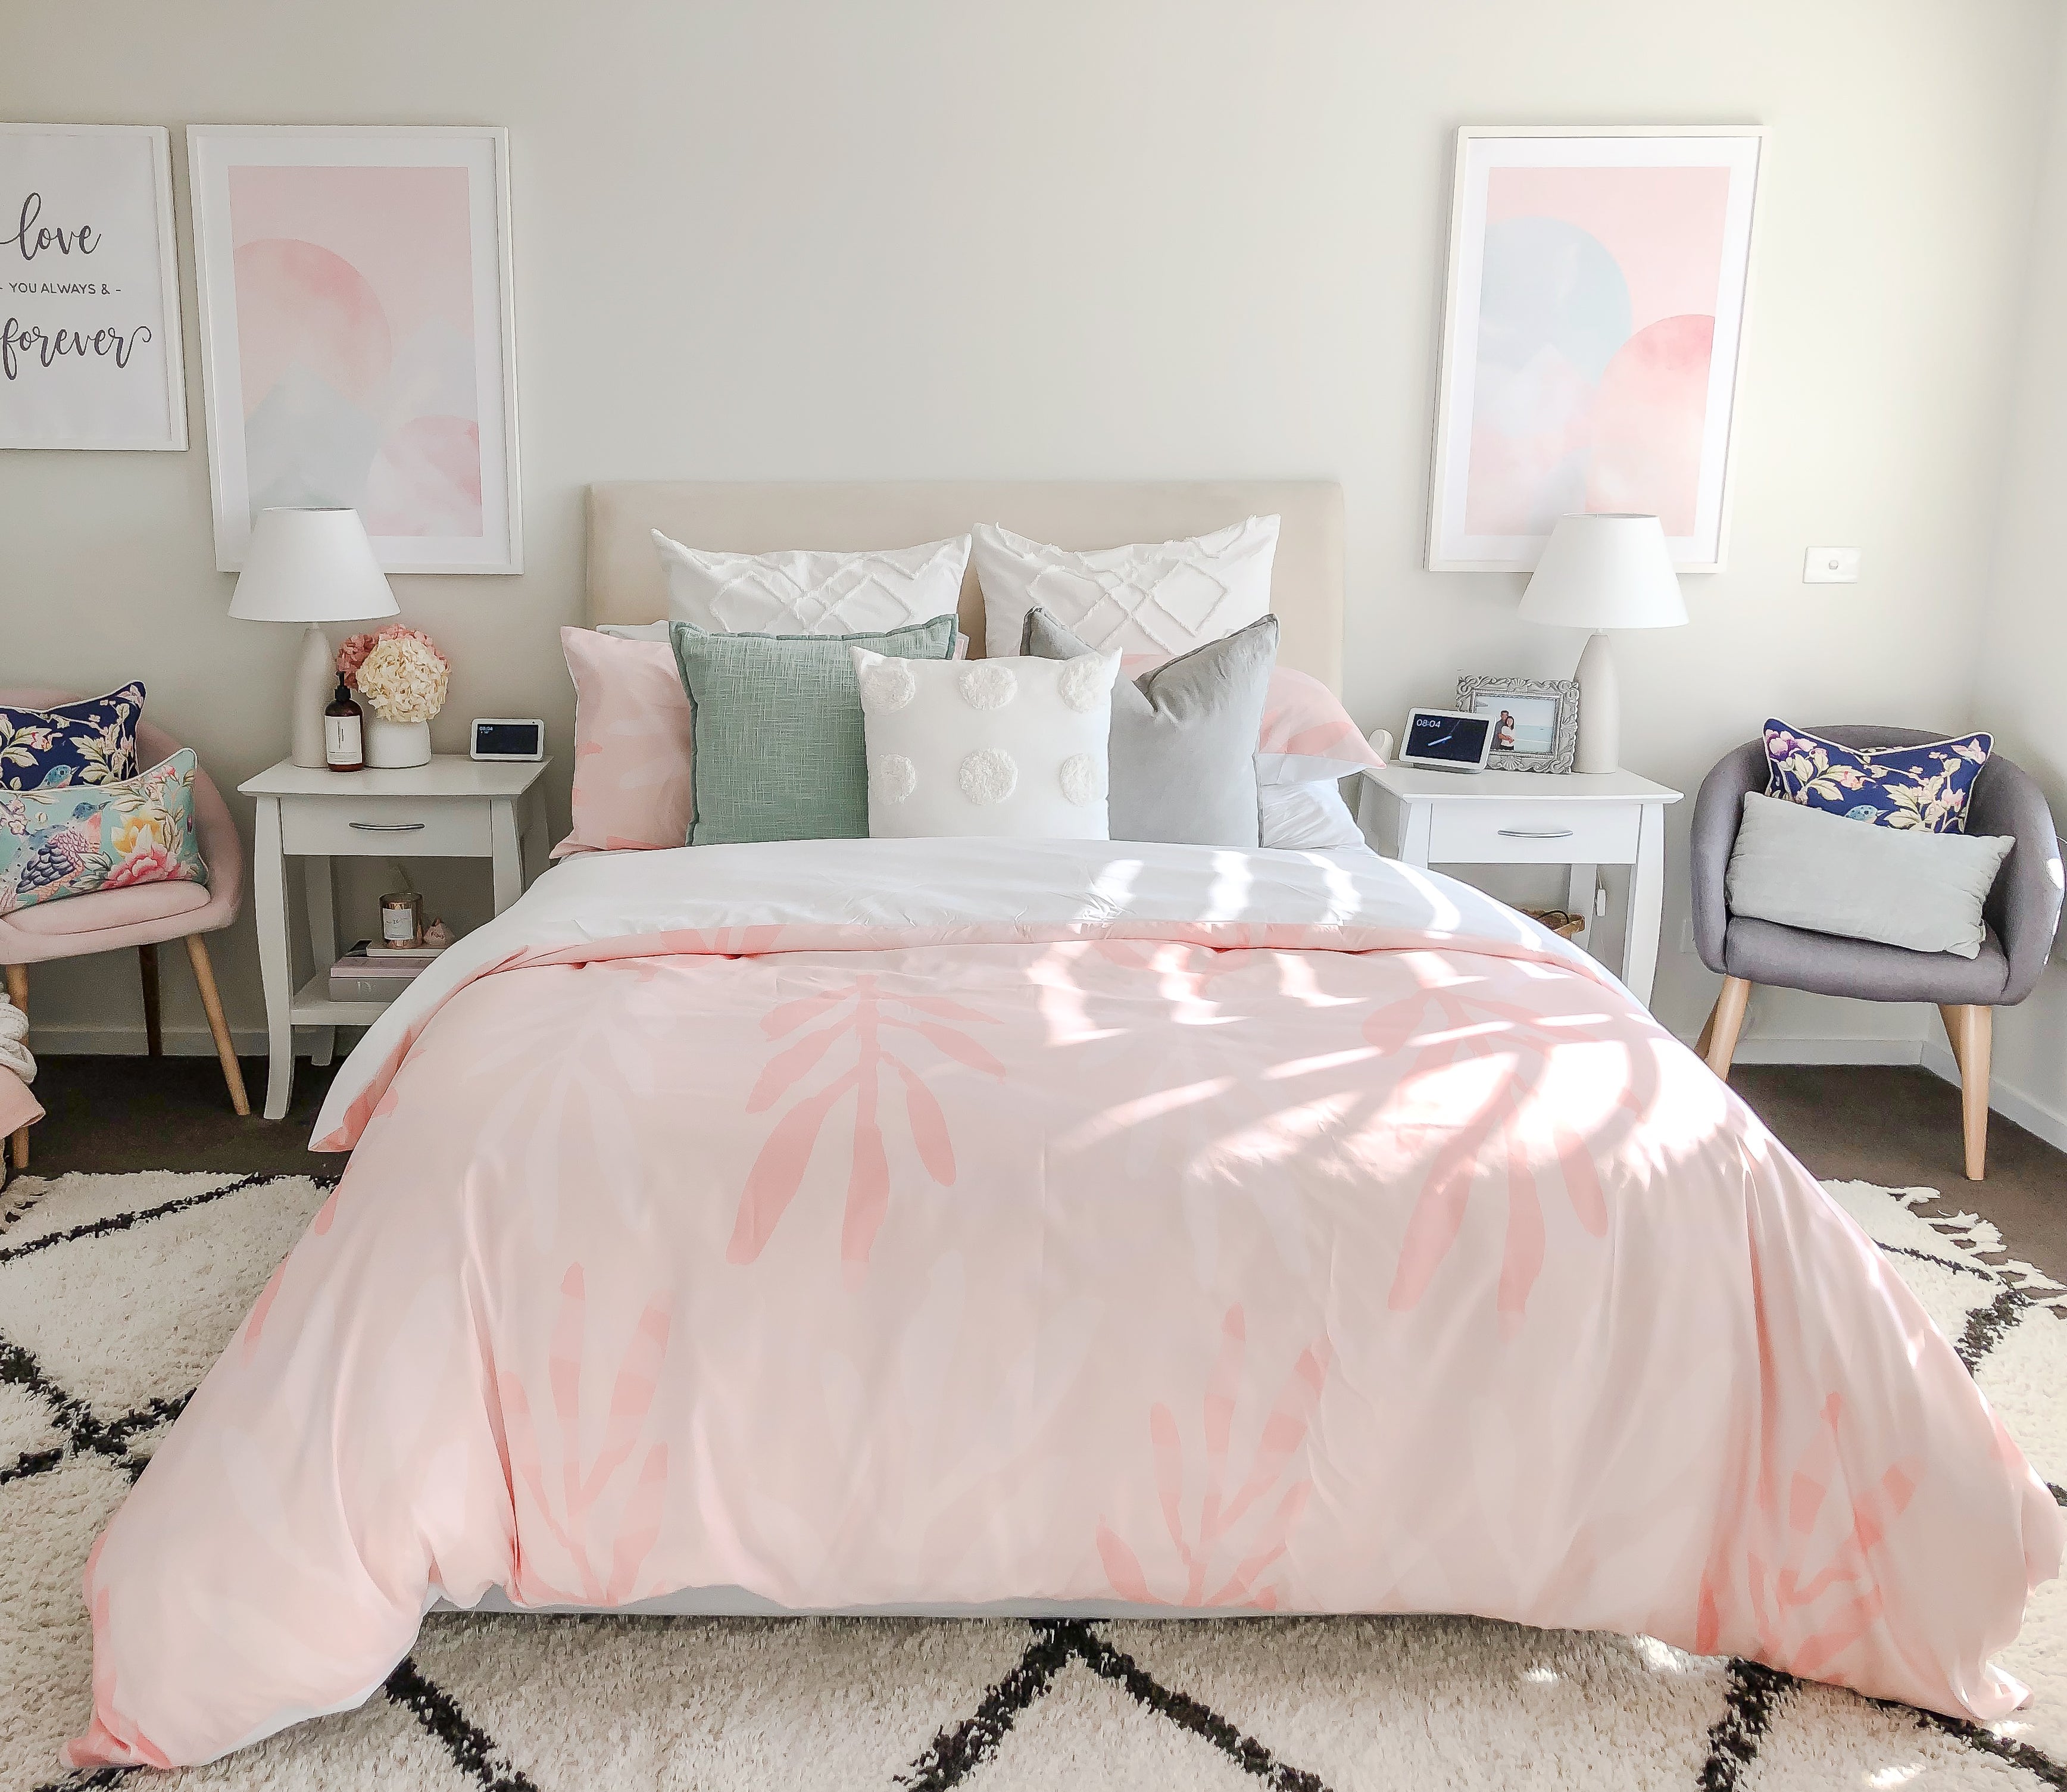 A light filled bedroom with the Botanica quilt cover in Peach on a queen sized bed.  There are complimenting display pillows in mix of soft pastel colours.  